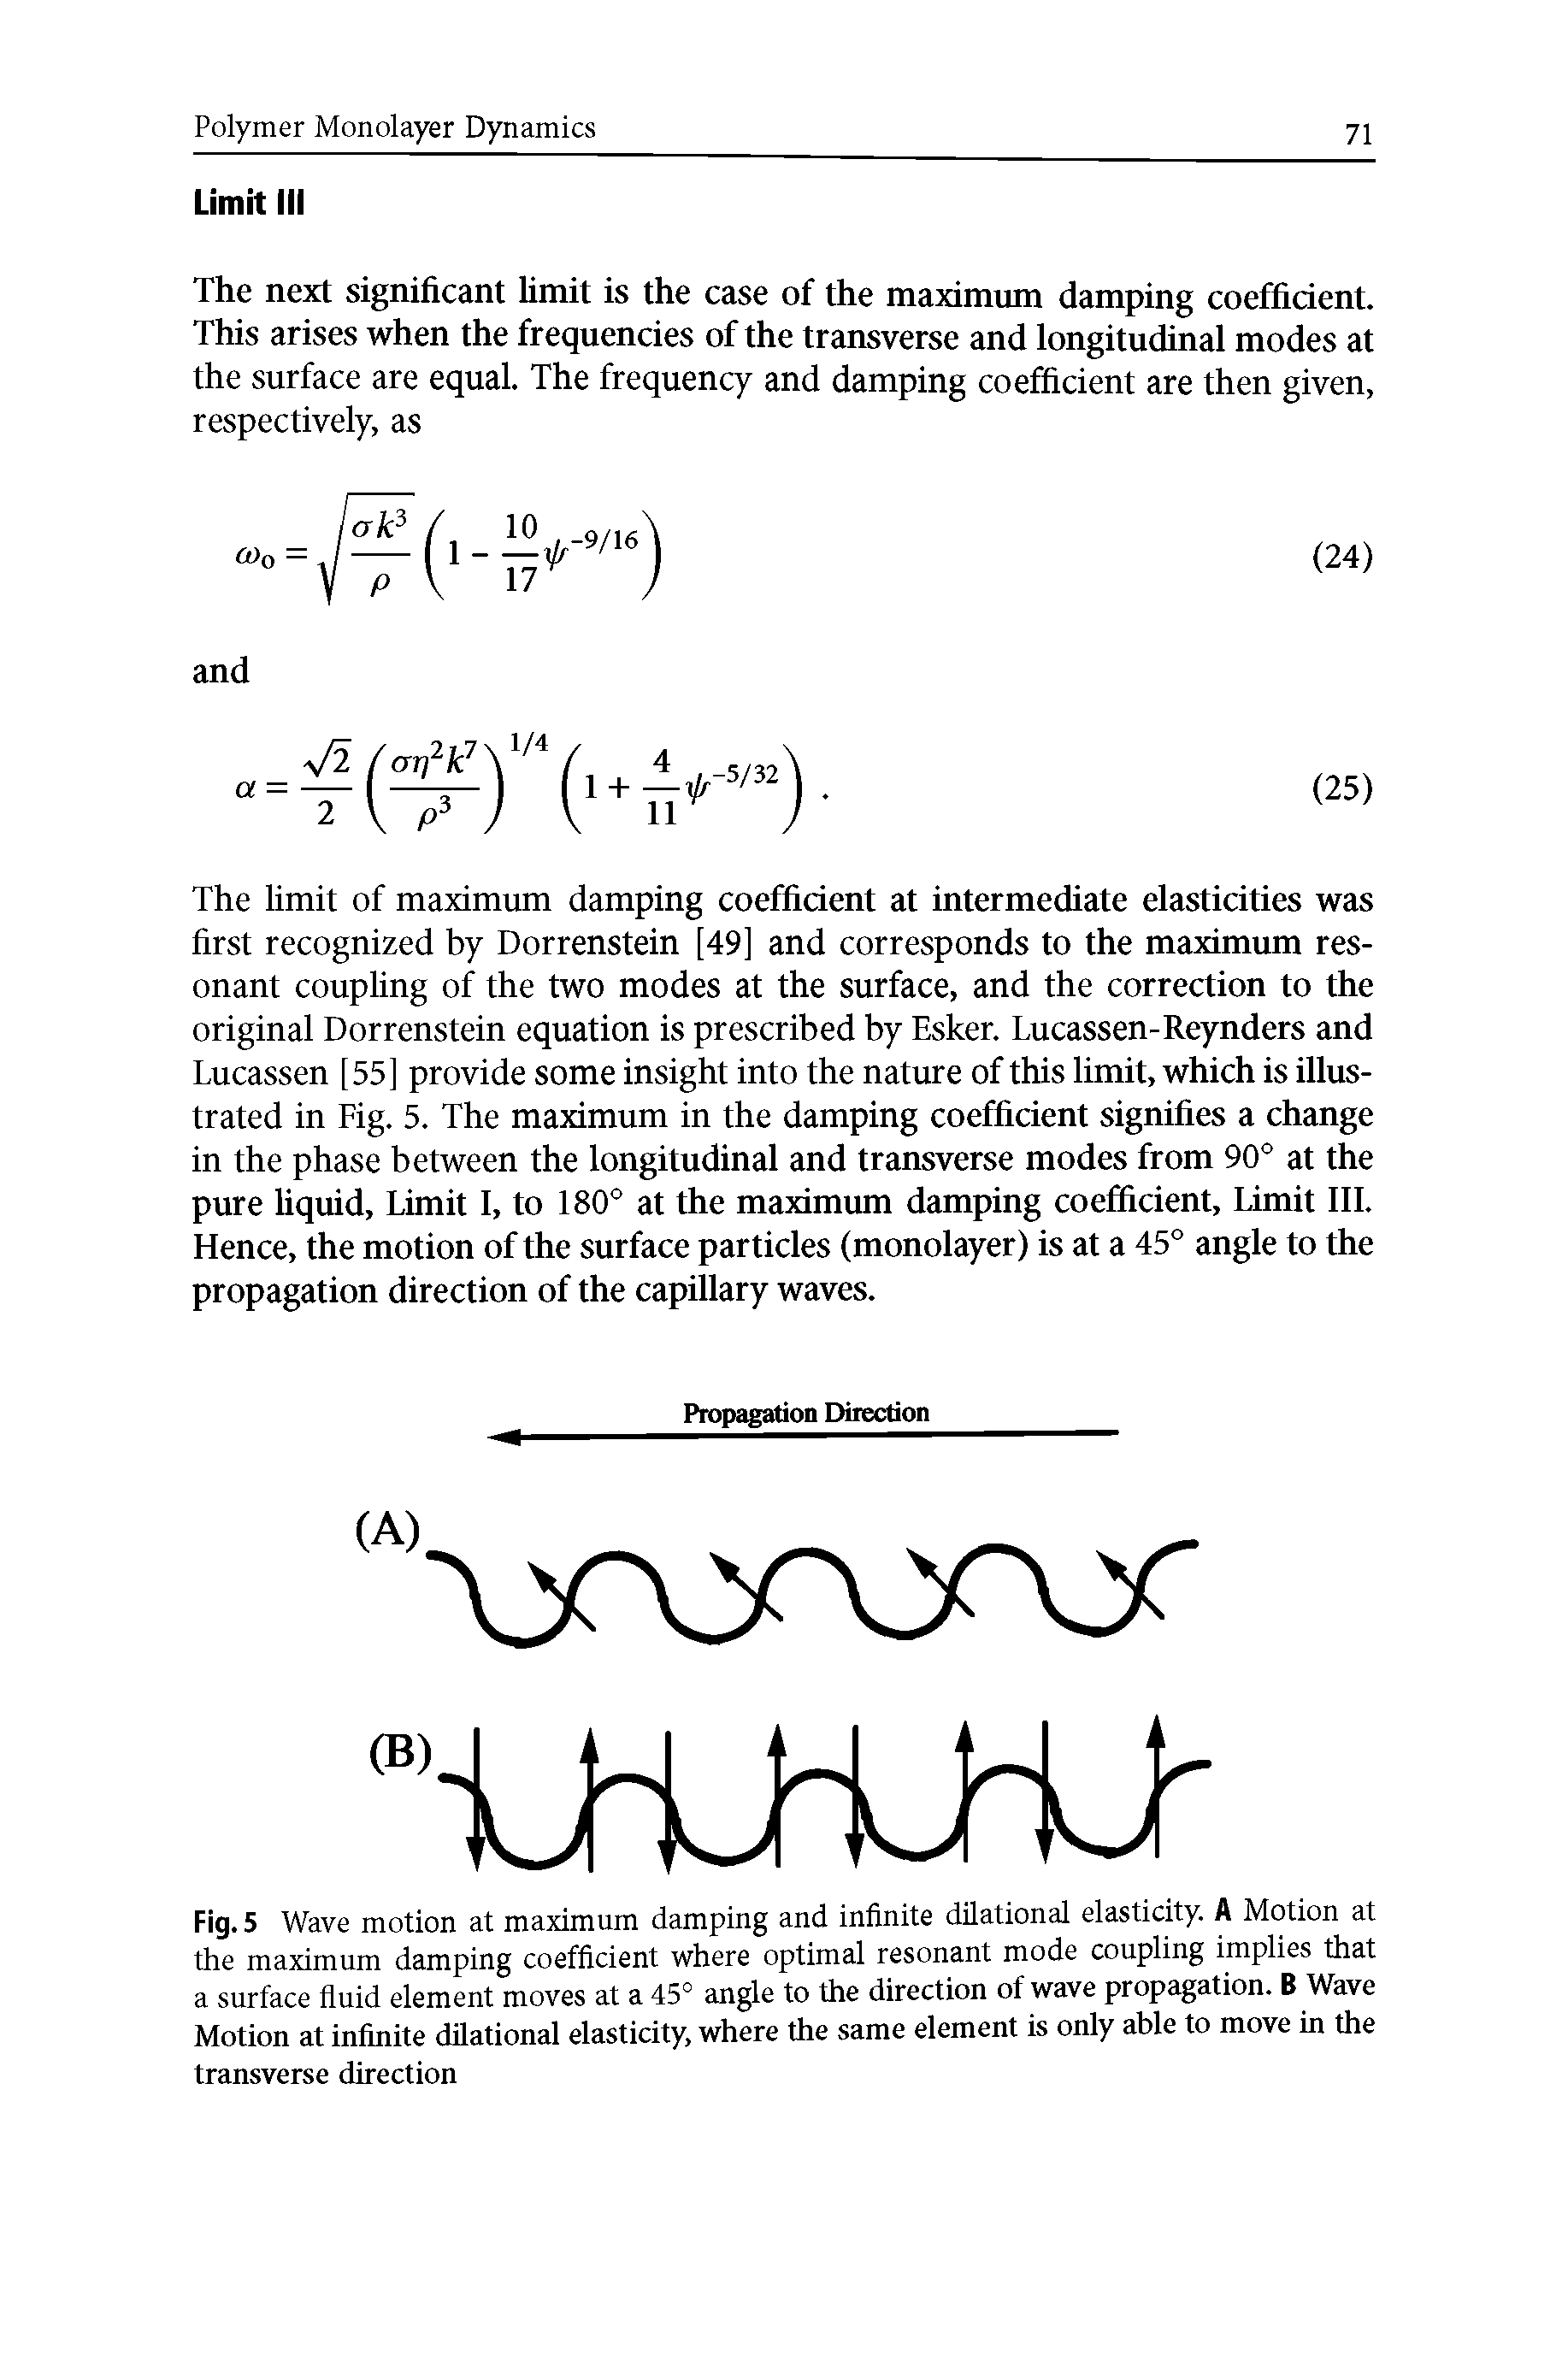 Fig. 5 Wave motion at maximum damping and infinite dilational elasticity. A Motion at the maximum damping coefficient where optimal resonant mode coupling implies that a surface fluid element moves at a 45° angle to the direction of wave propagation. B Wave Motion at infinite dilational elasticity, where the same element is only able to move in the transverse direction...